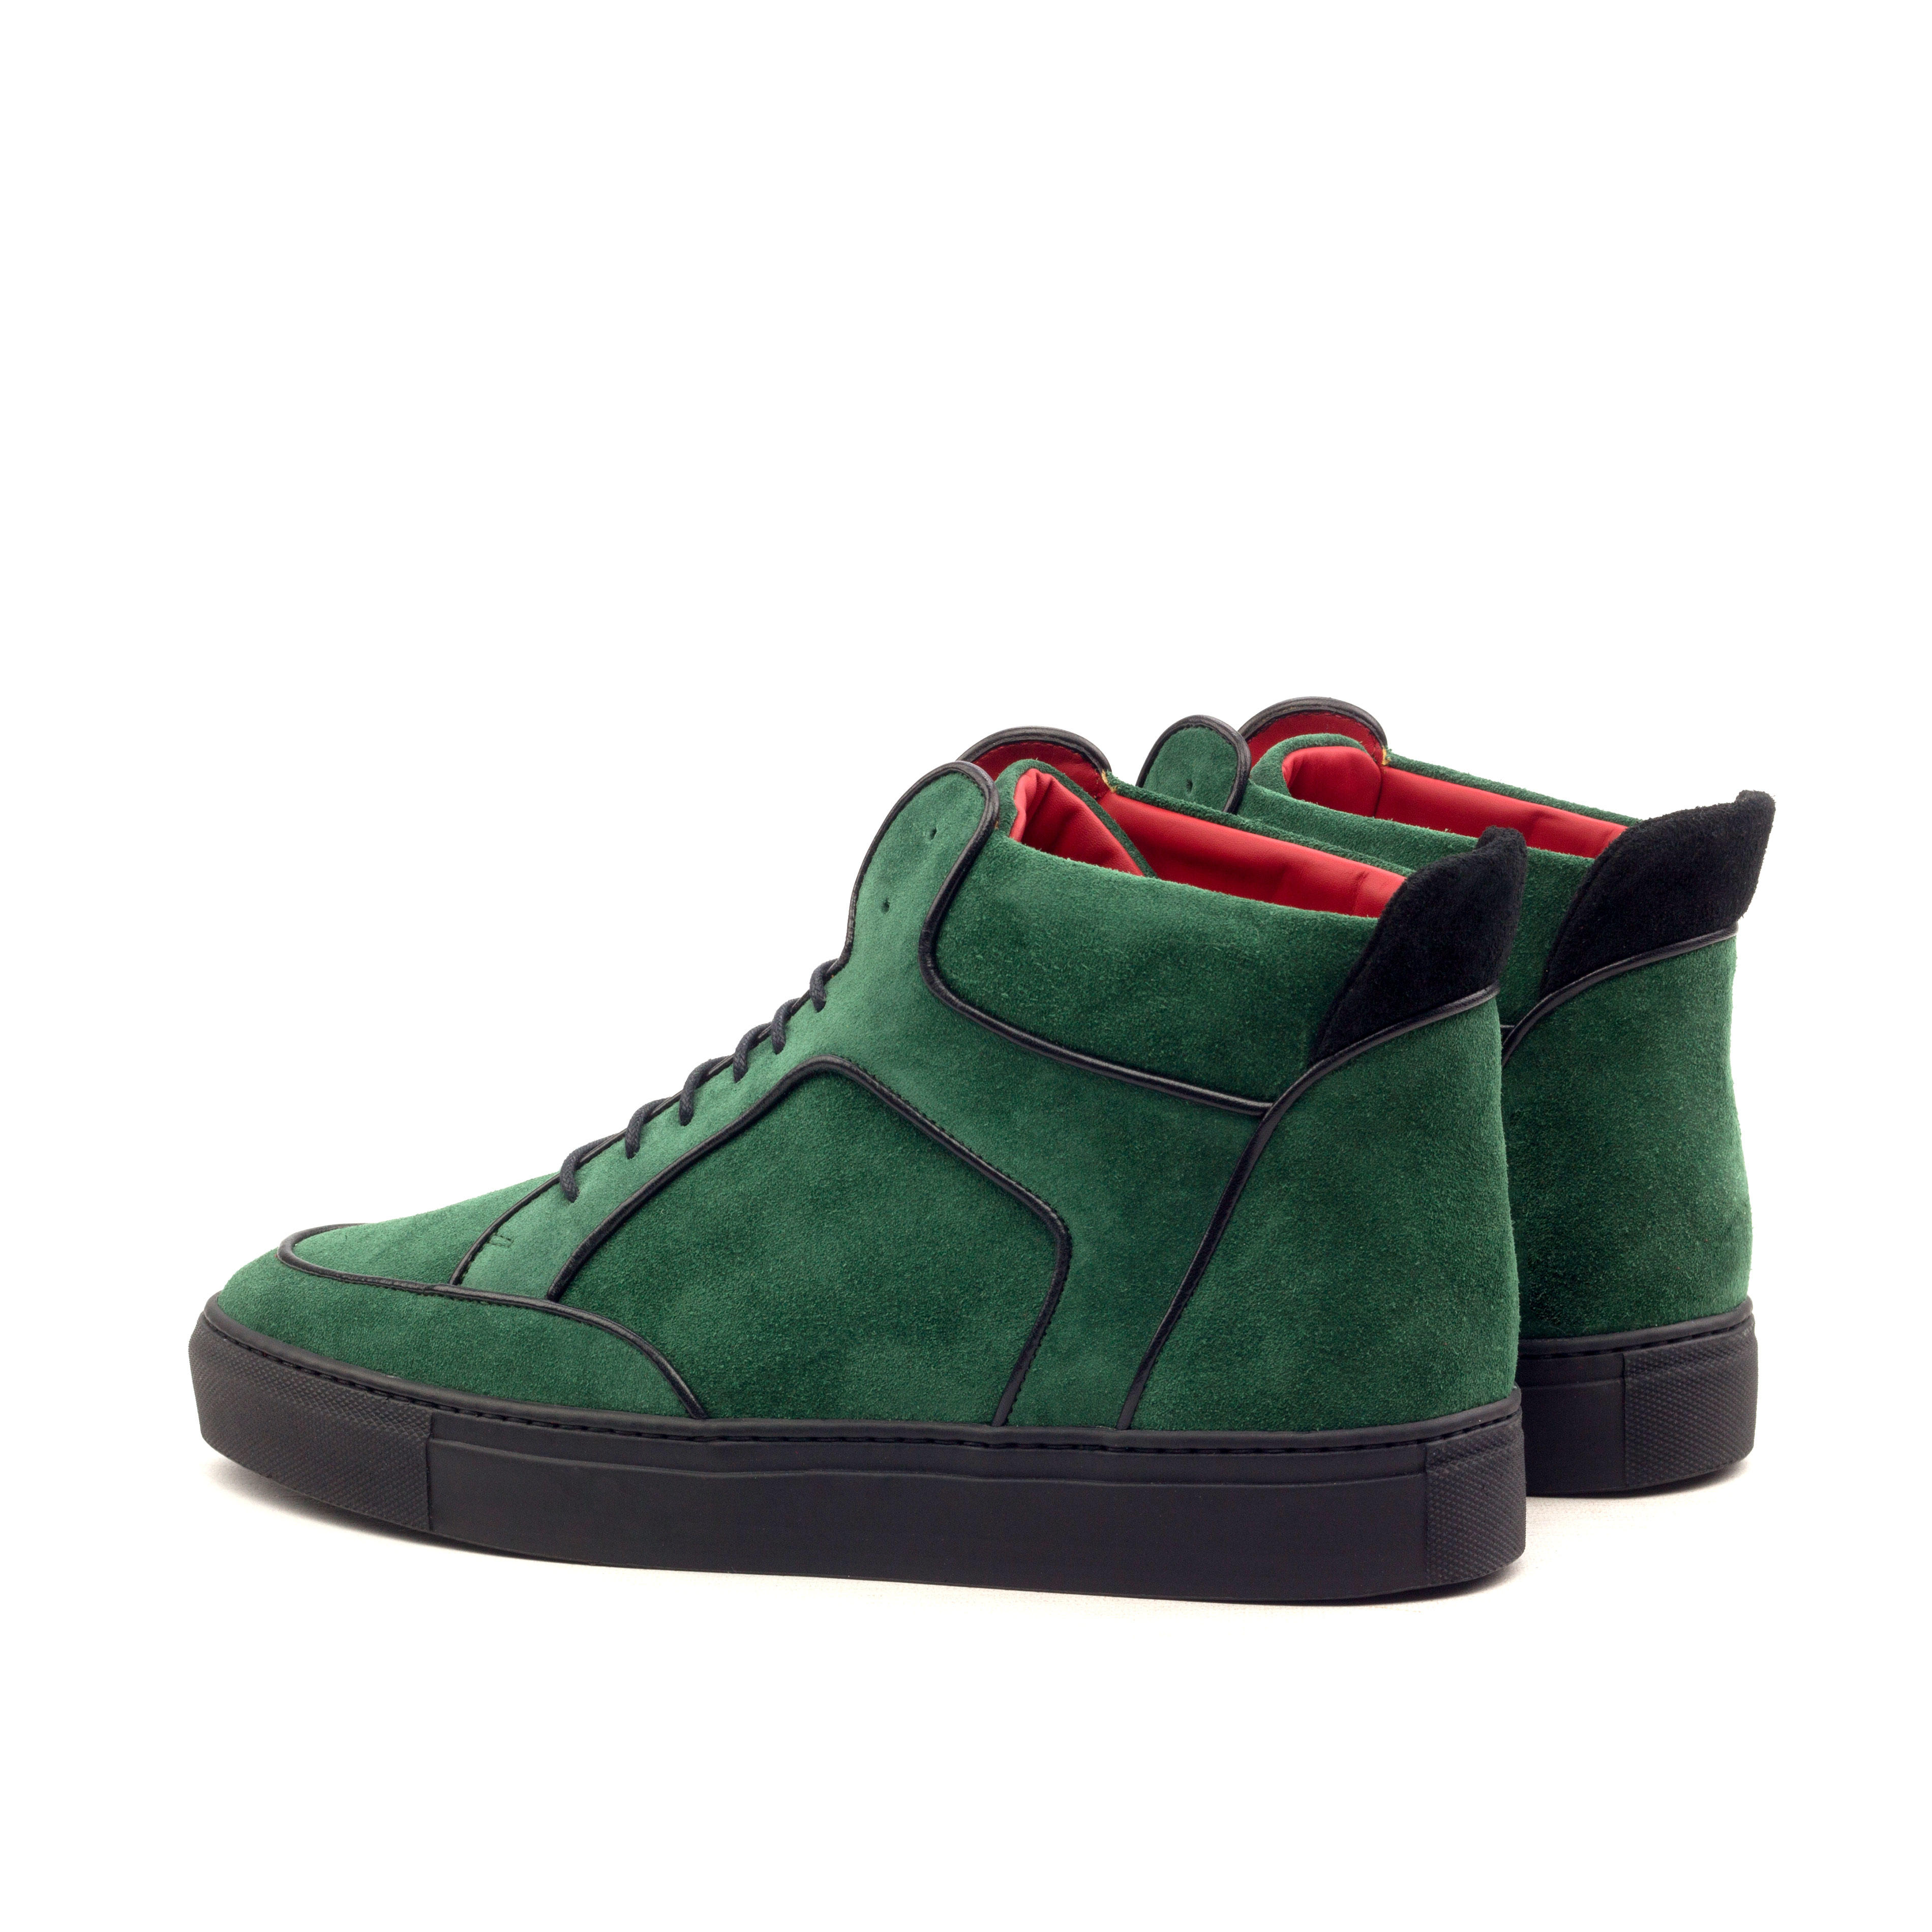 Manor of London 'The Hamilton' Green Suede High-Top Trainer Luxury Custom Initials Monogrammed Back Side View